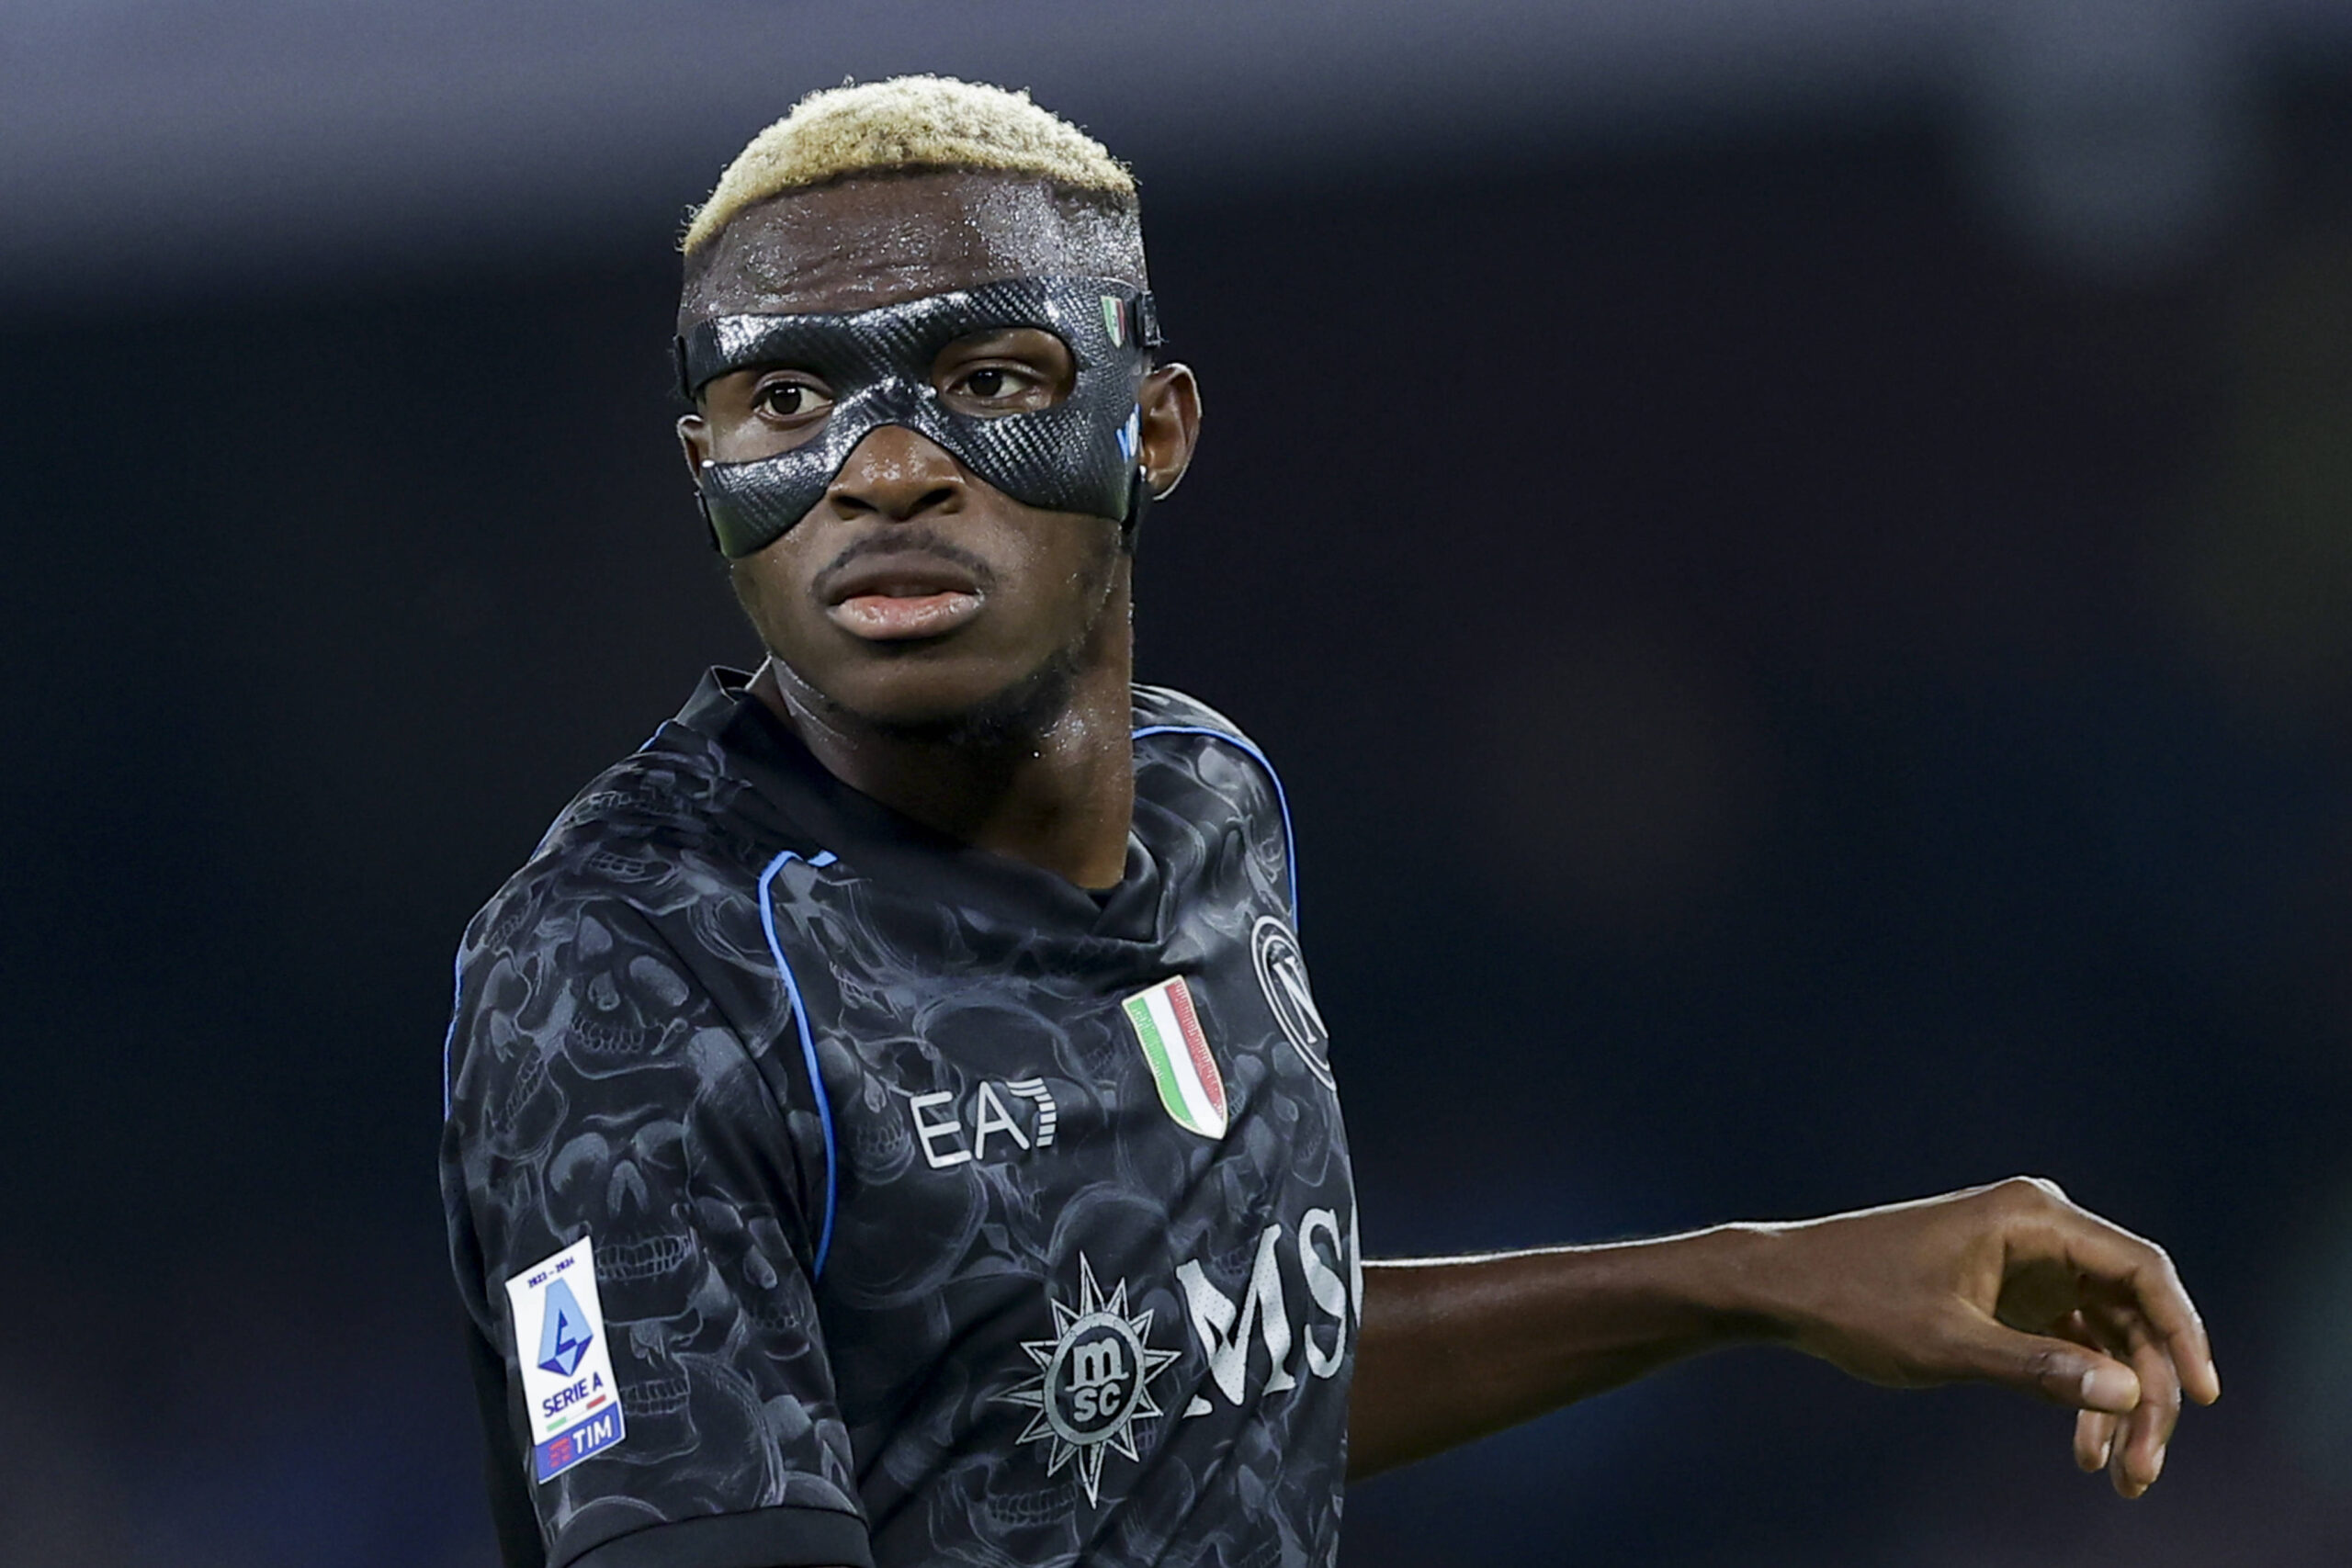 ‘Anything Can Happen’: Fabrizio Romano Reports That £104M Star’s Agent ‘Held Talks’ With Arsenal